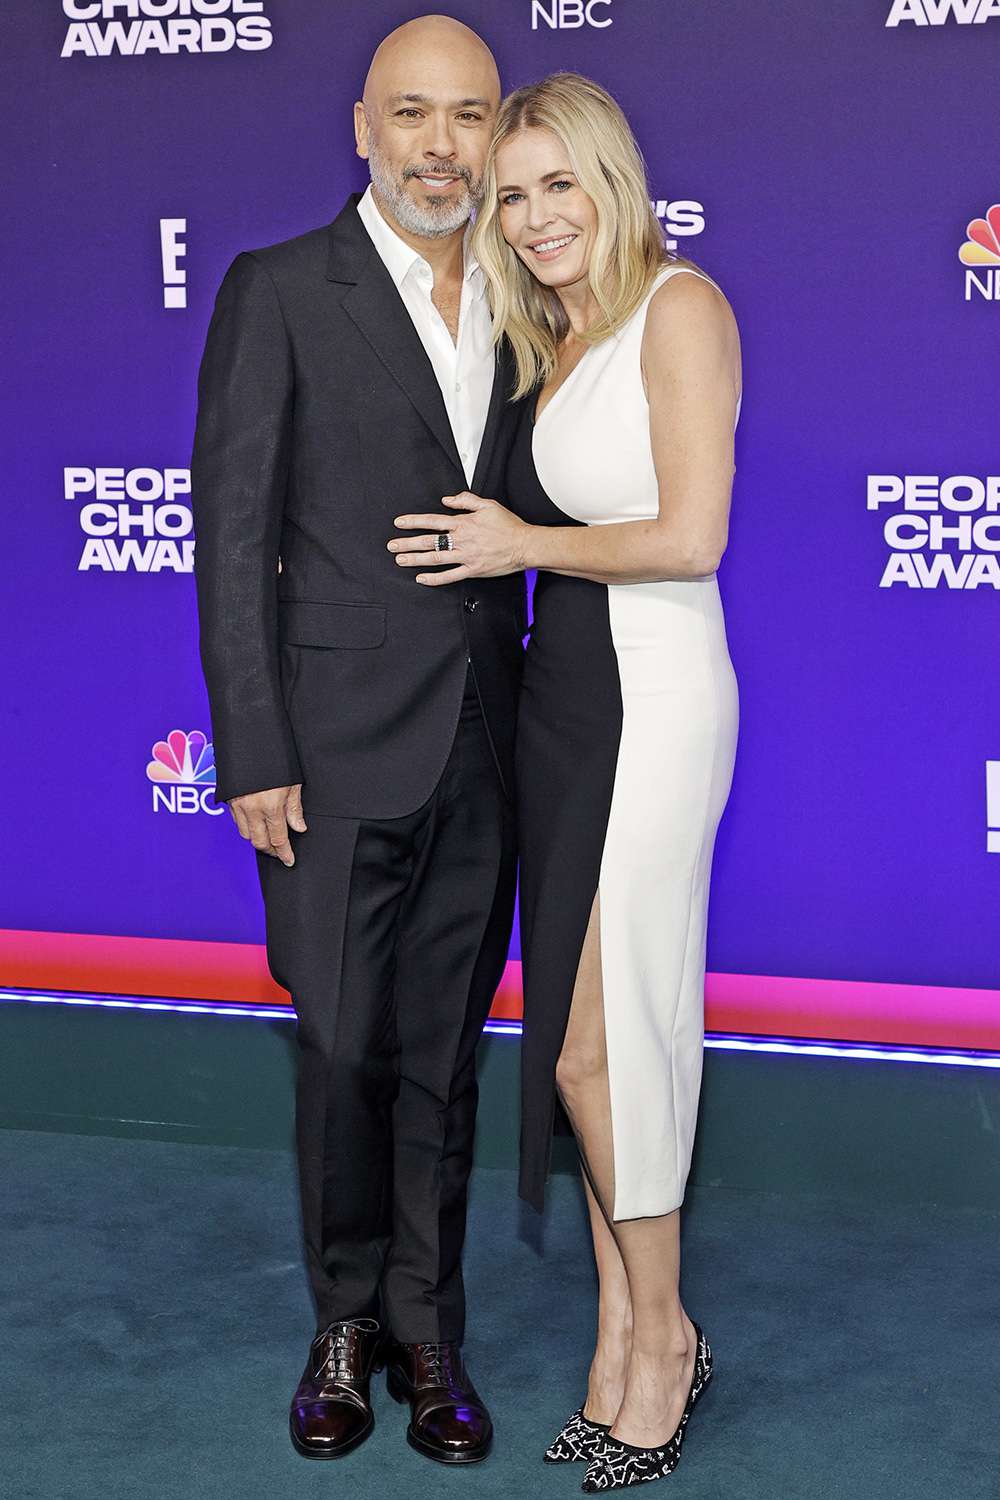 SANTA MONICA, CALIFORNIA - DECEMBER 07: (L-R) Jo Koy and Chelsea Handler attend the 47th Annual People's Choice Awards at Barker Hangar on December 07, 2021 in Santa Monica, California. (Photo by Amy Sussman/Getty Images,)